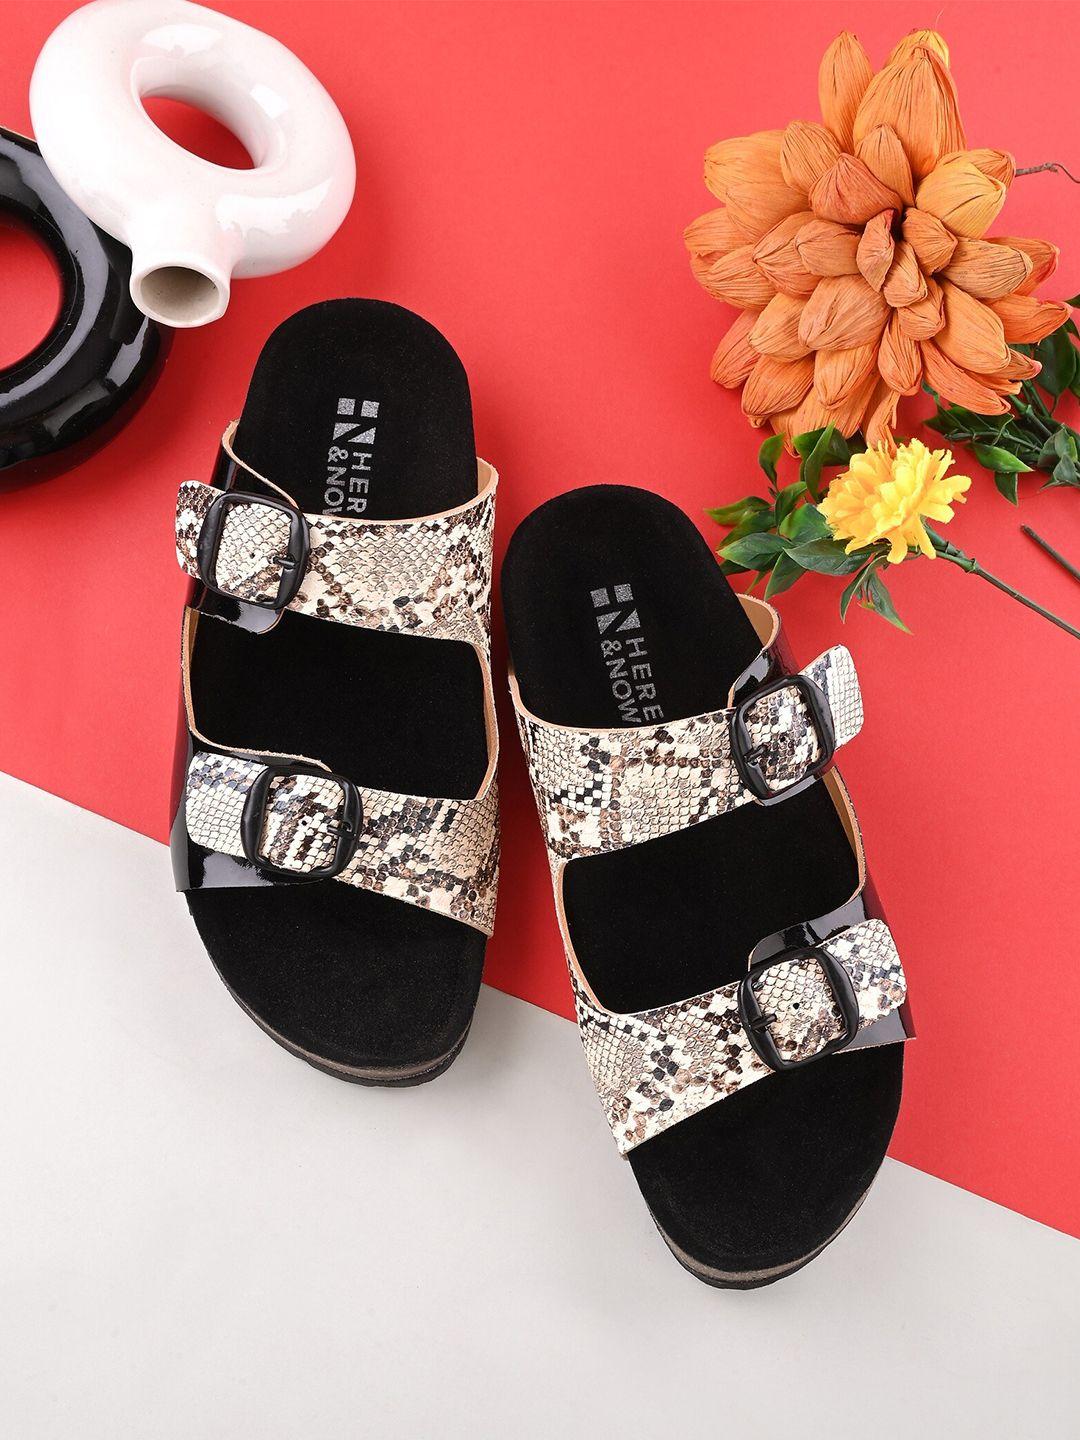 here&now-women-textured-two-strap-comfort-open-toe-flats-with-buckle-detail